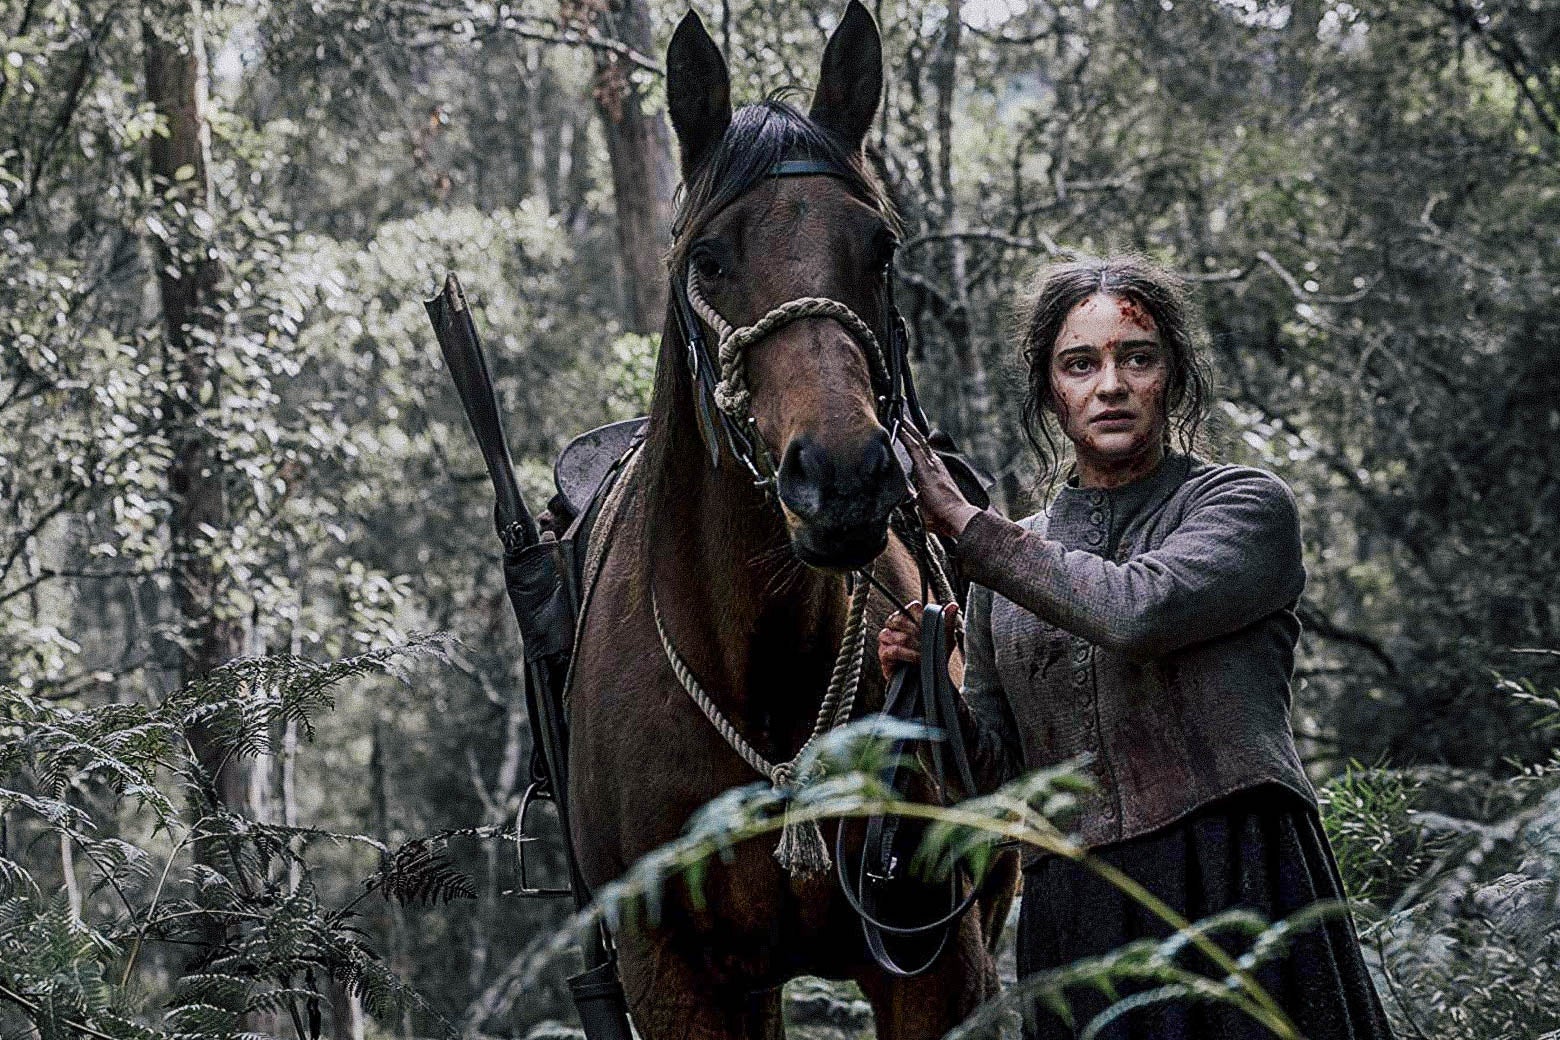 In this still from The Nightingale, a bloodied Aisling Franciosi leads a horse through a forest.